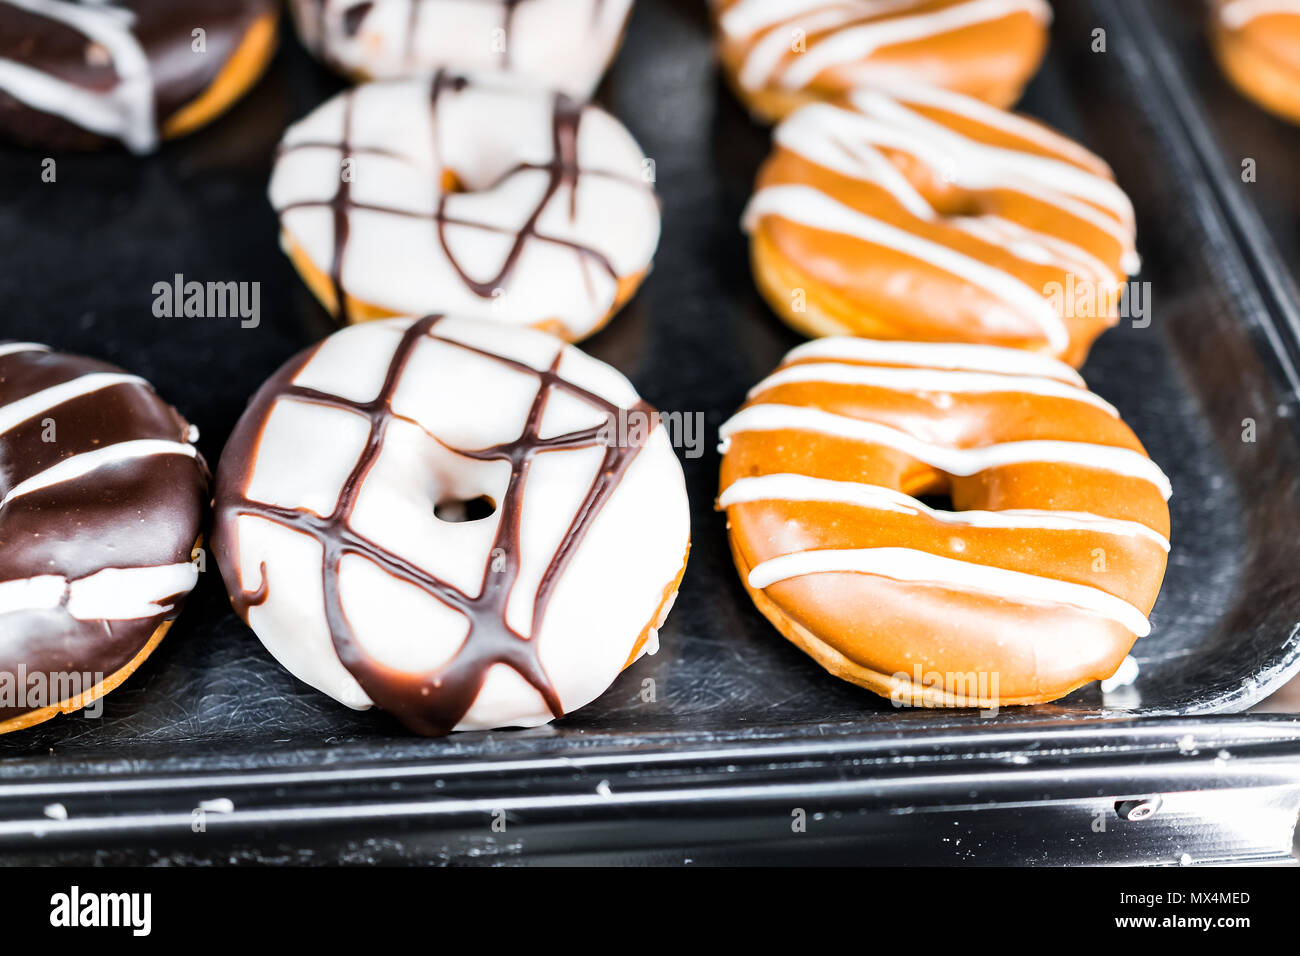 Chocolate brown, caramel, and white icing donuts with holes closeup on bakery tray, deep fried vanilla, delicious tasty Stock Photo